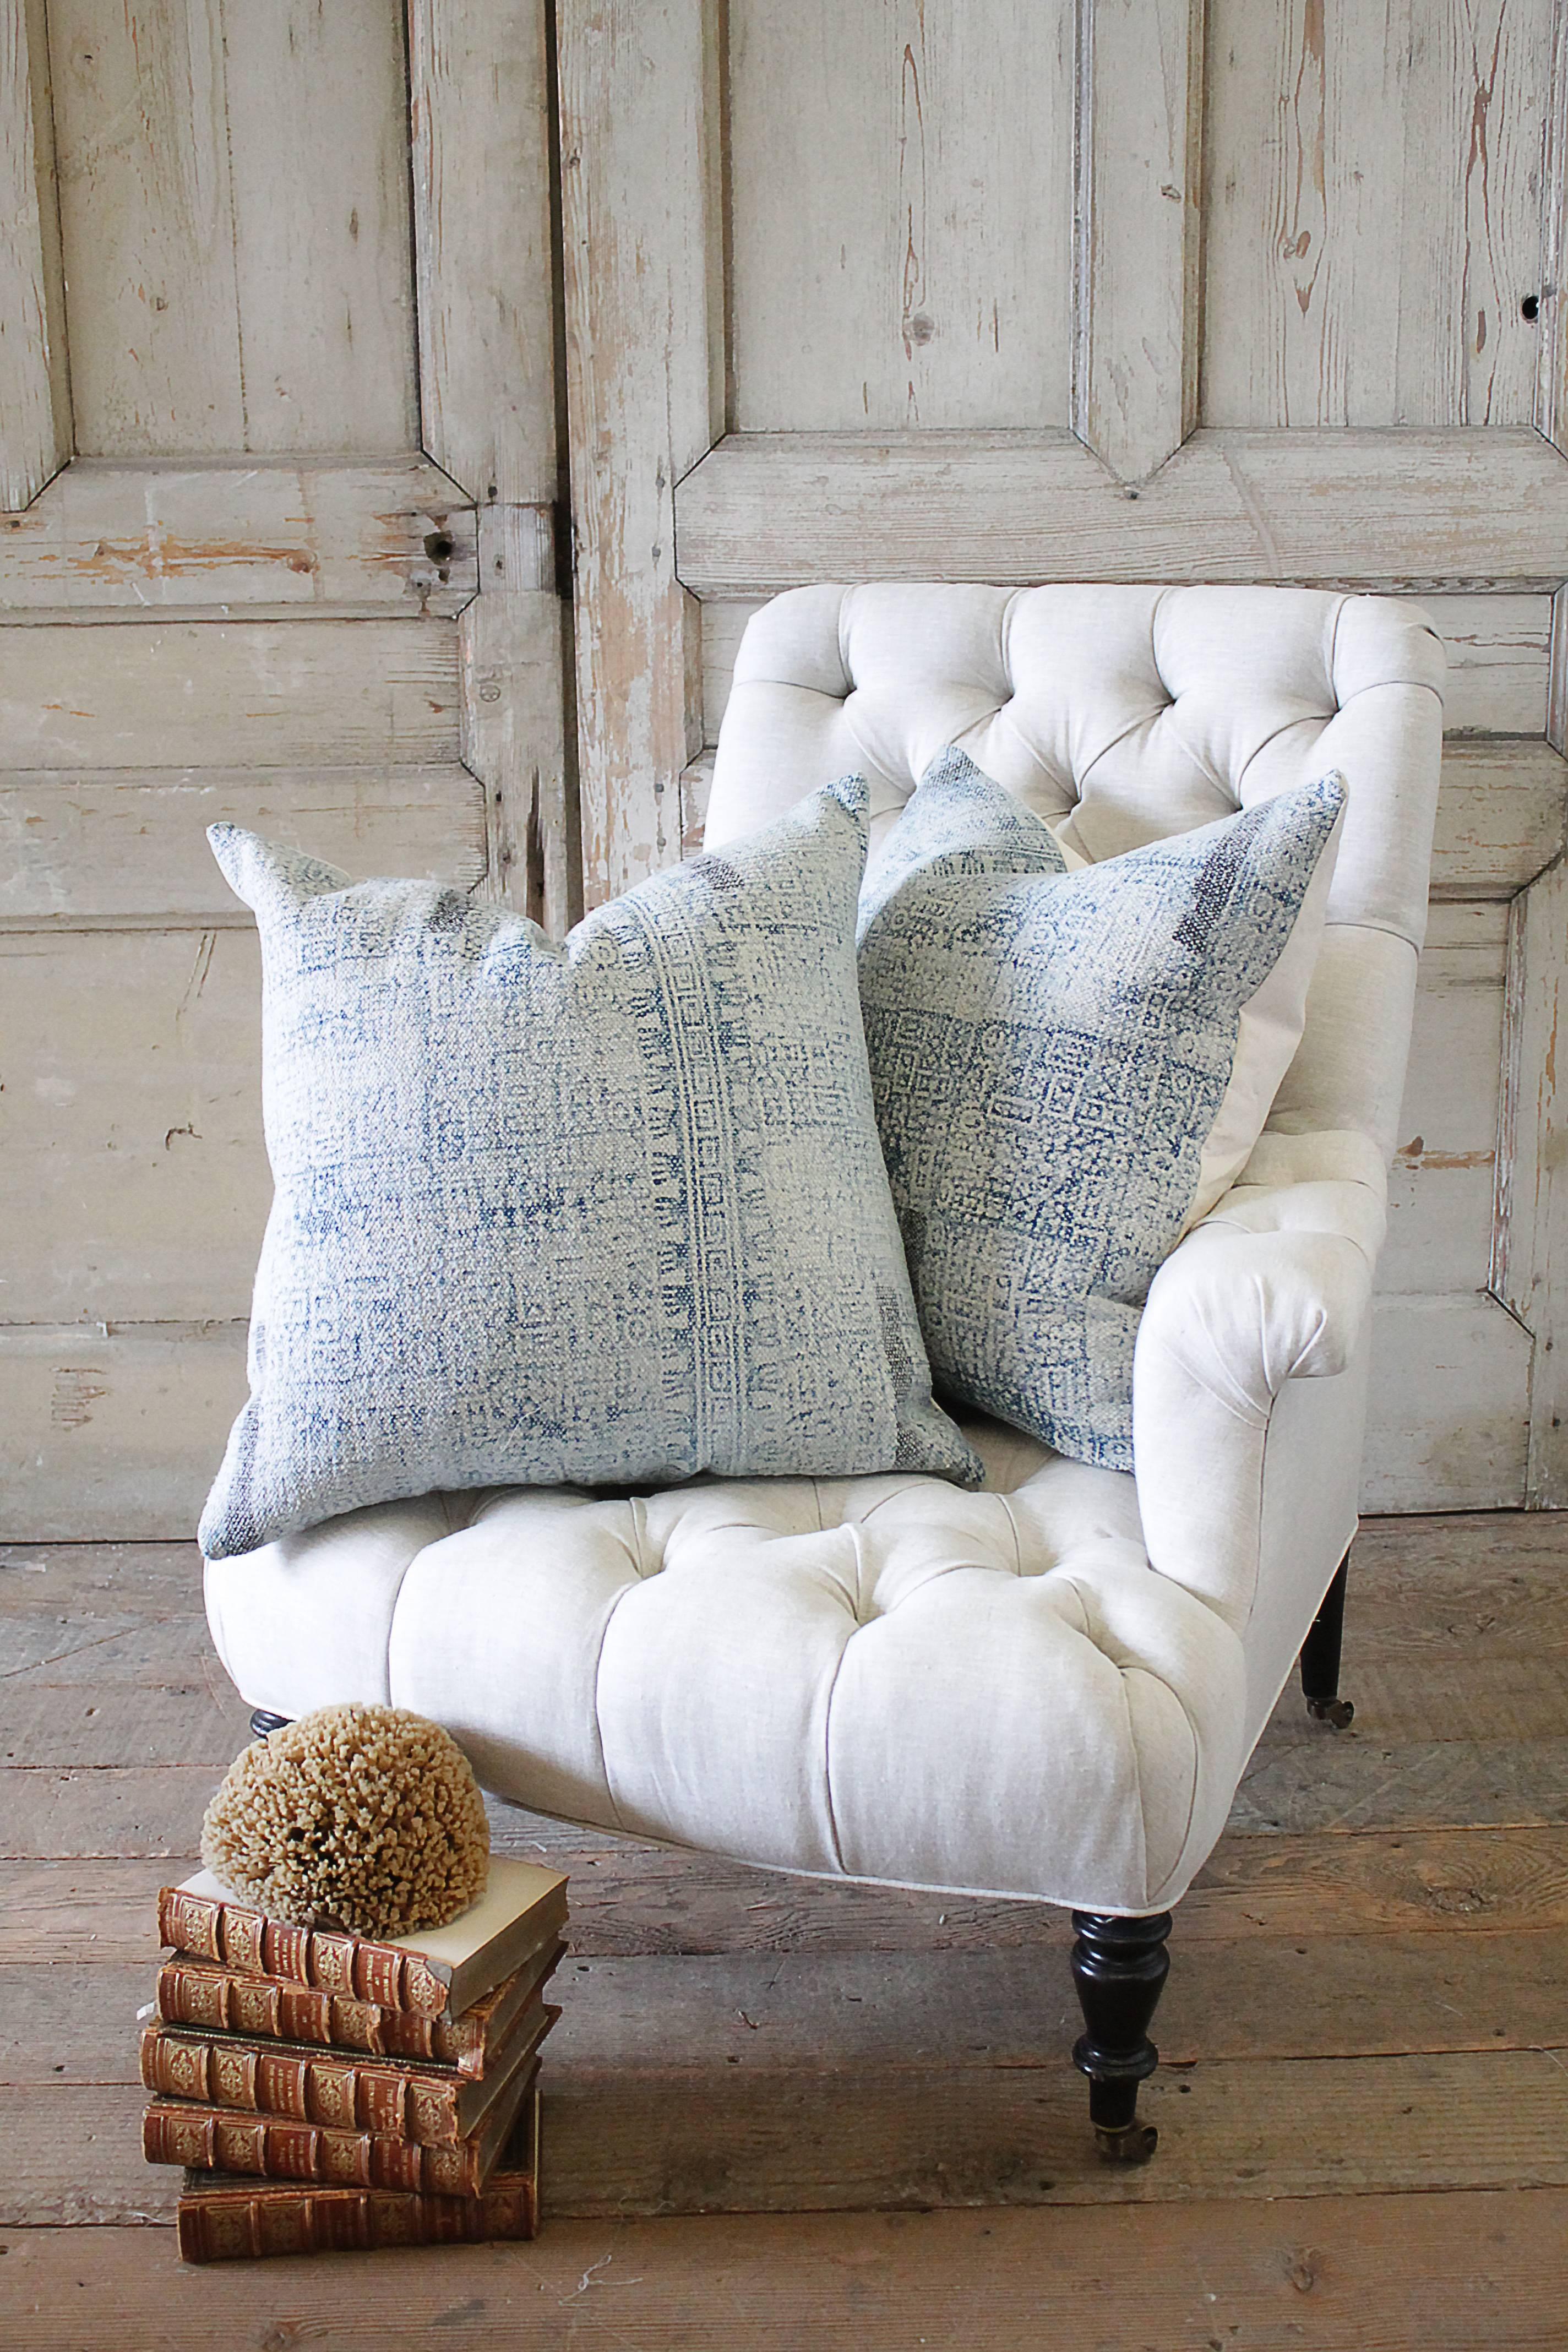 Measure: 22 x 22
Cotton pillow in an over-dyed boho chic pattern in faded blues.
Solid back with zipper closure. These beautiful pillows were inspired from the new movie Home Again, creating a relaxed California boho chic vibe.
New, custom-made